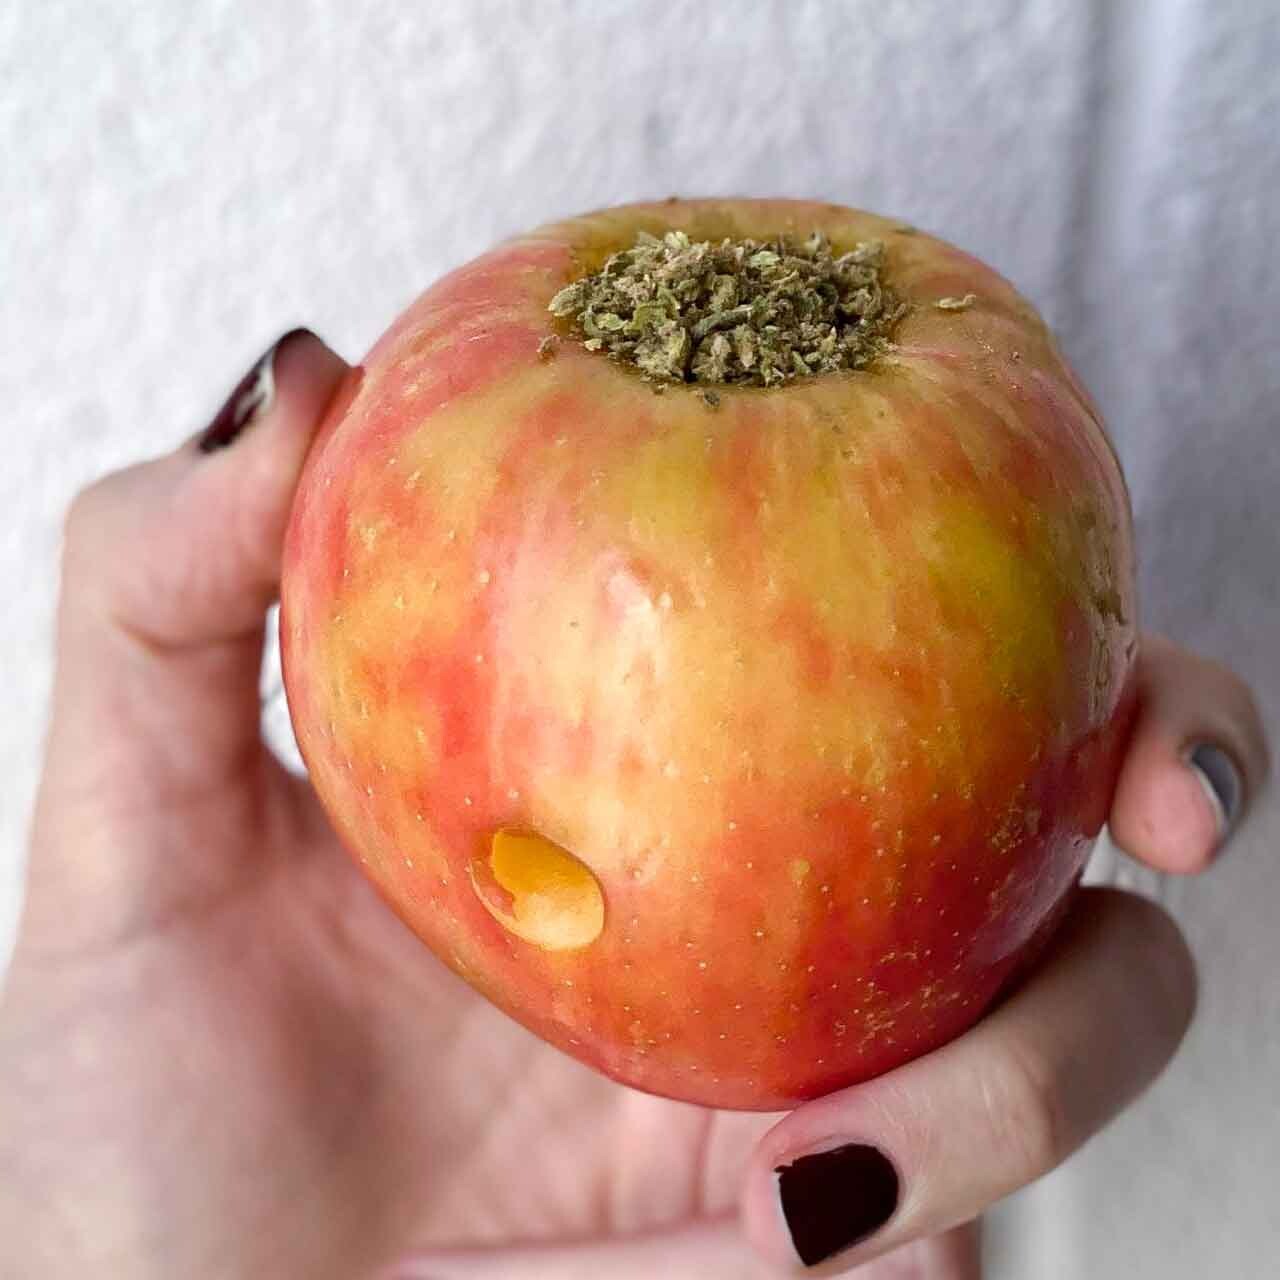 Hand Holding DIY Apple Weed Pipe